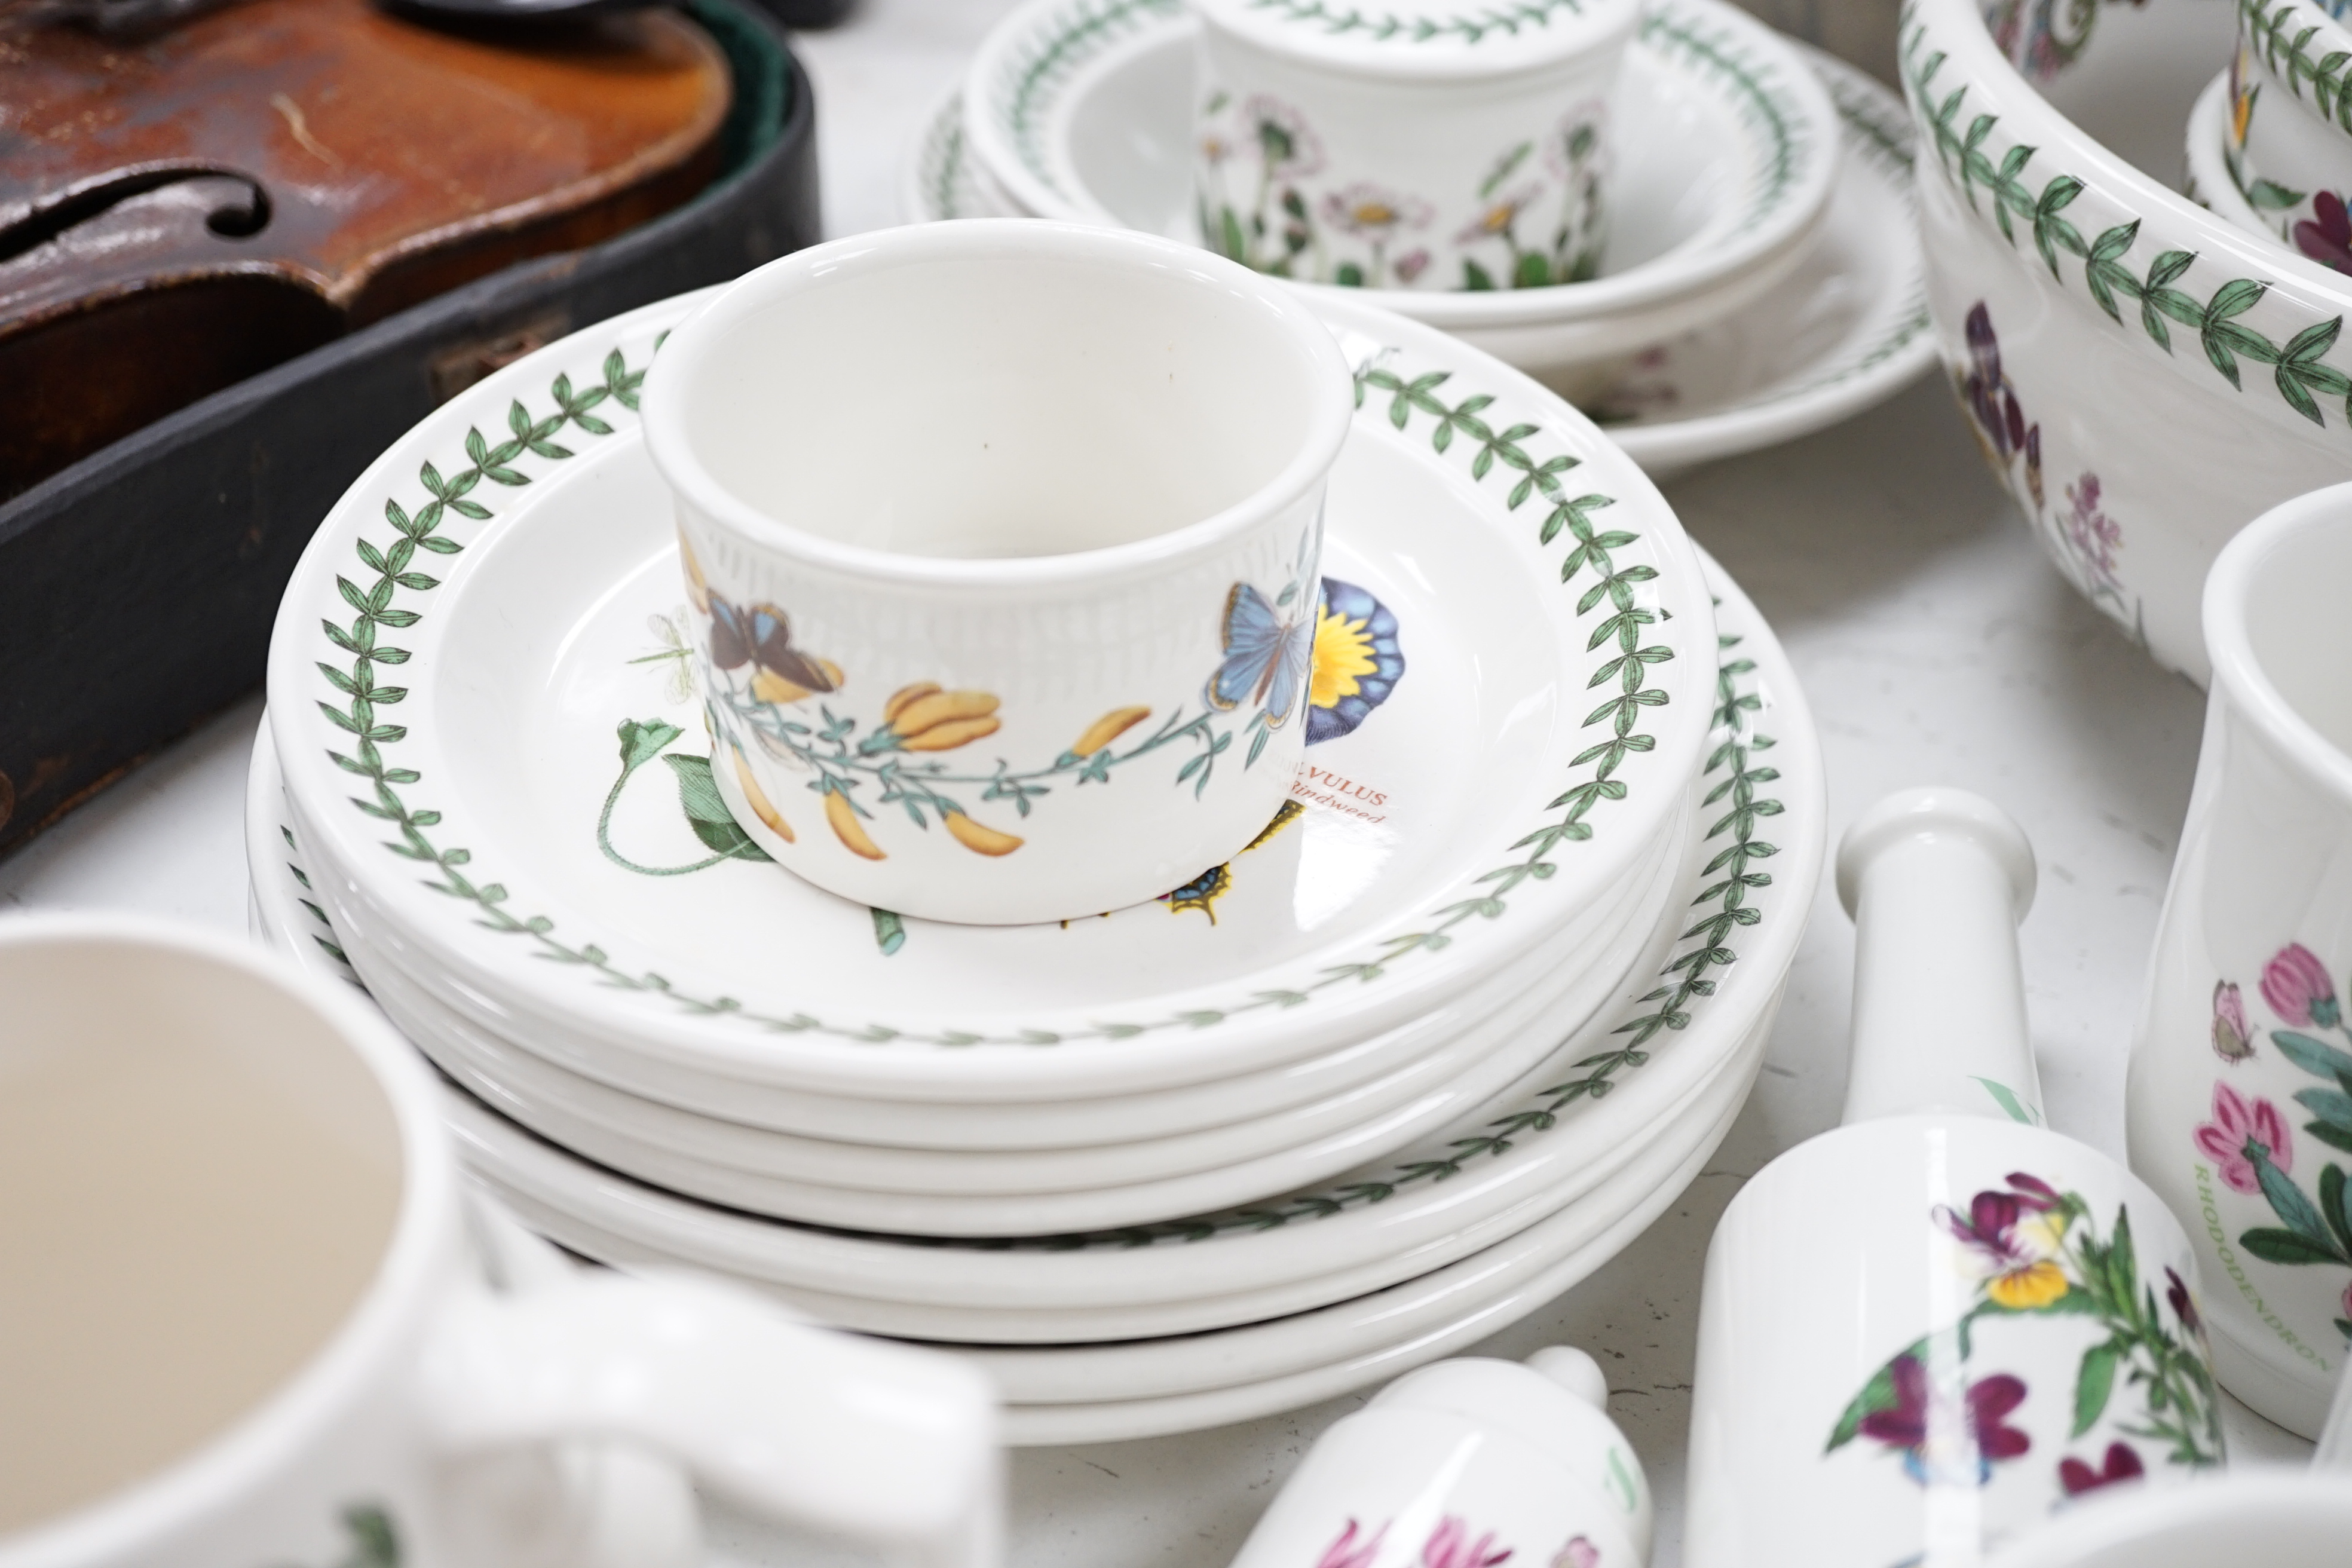 Portmeirion botanical dinner wares including mugs, storage jars and plates, largest 26cm in - Image 7 of 7